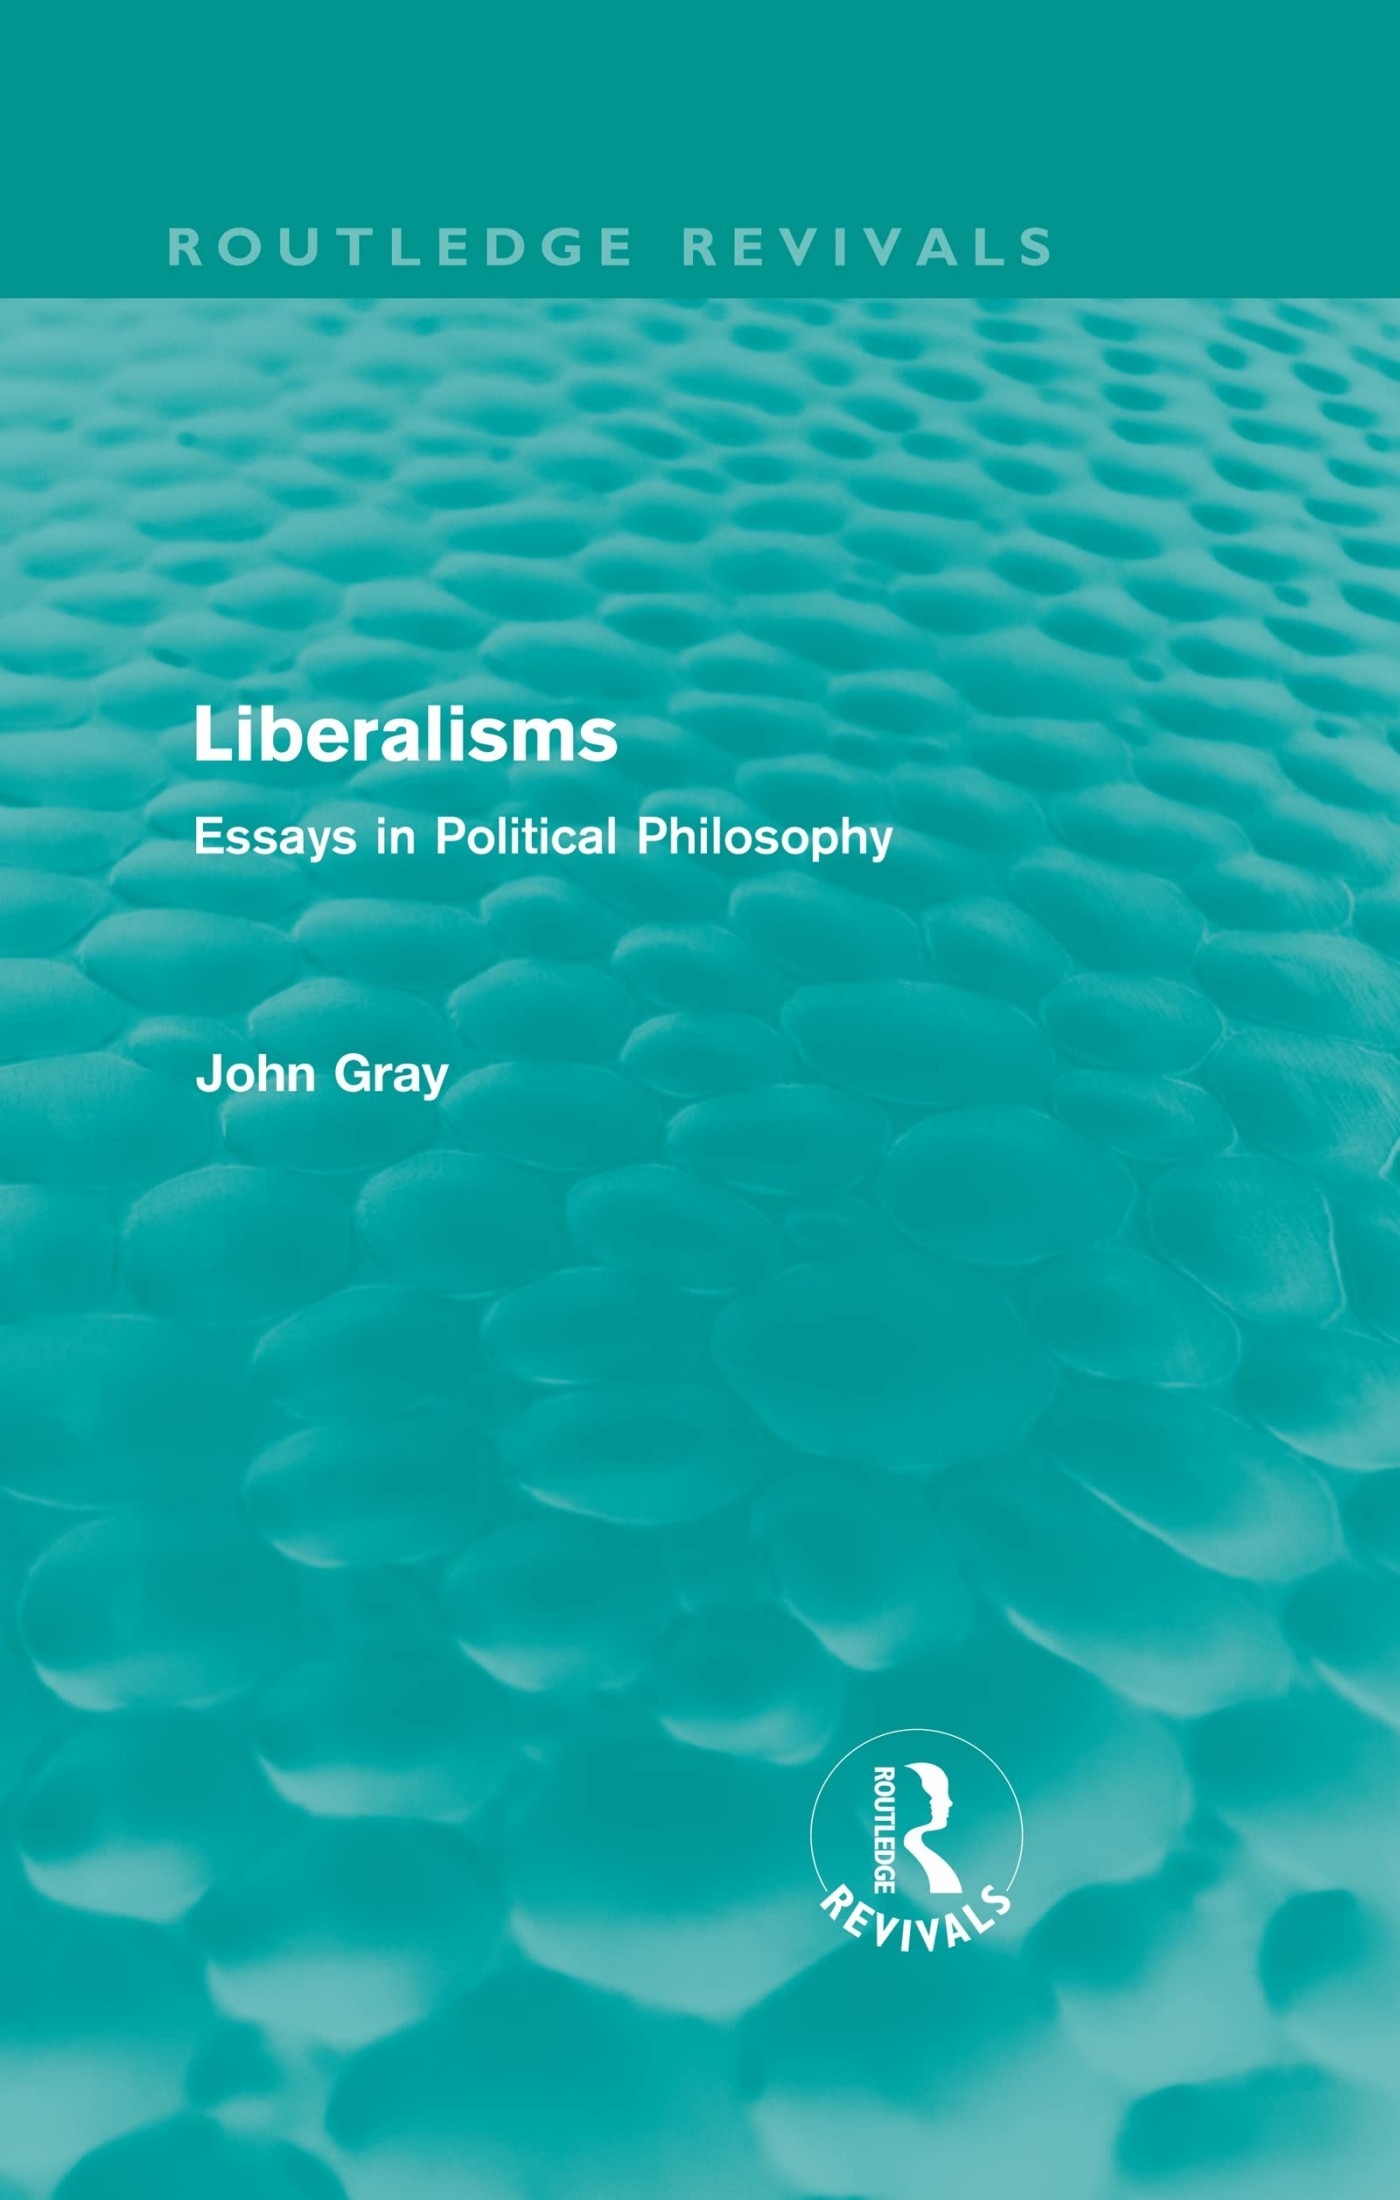 Liberalisms: Essays in Political Philosophy